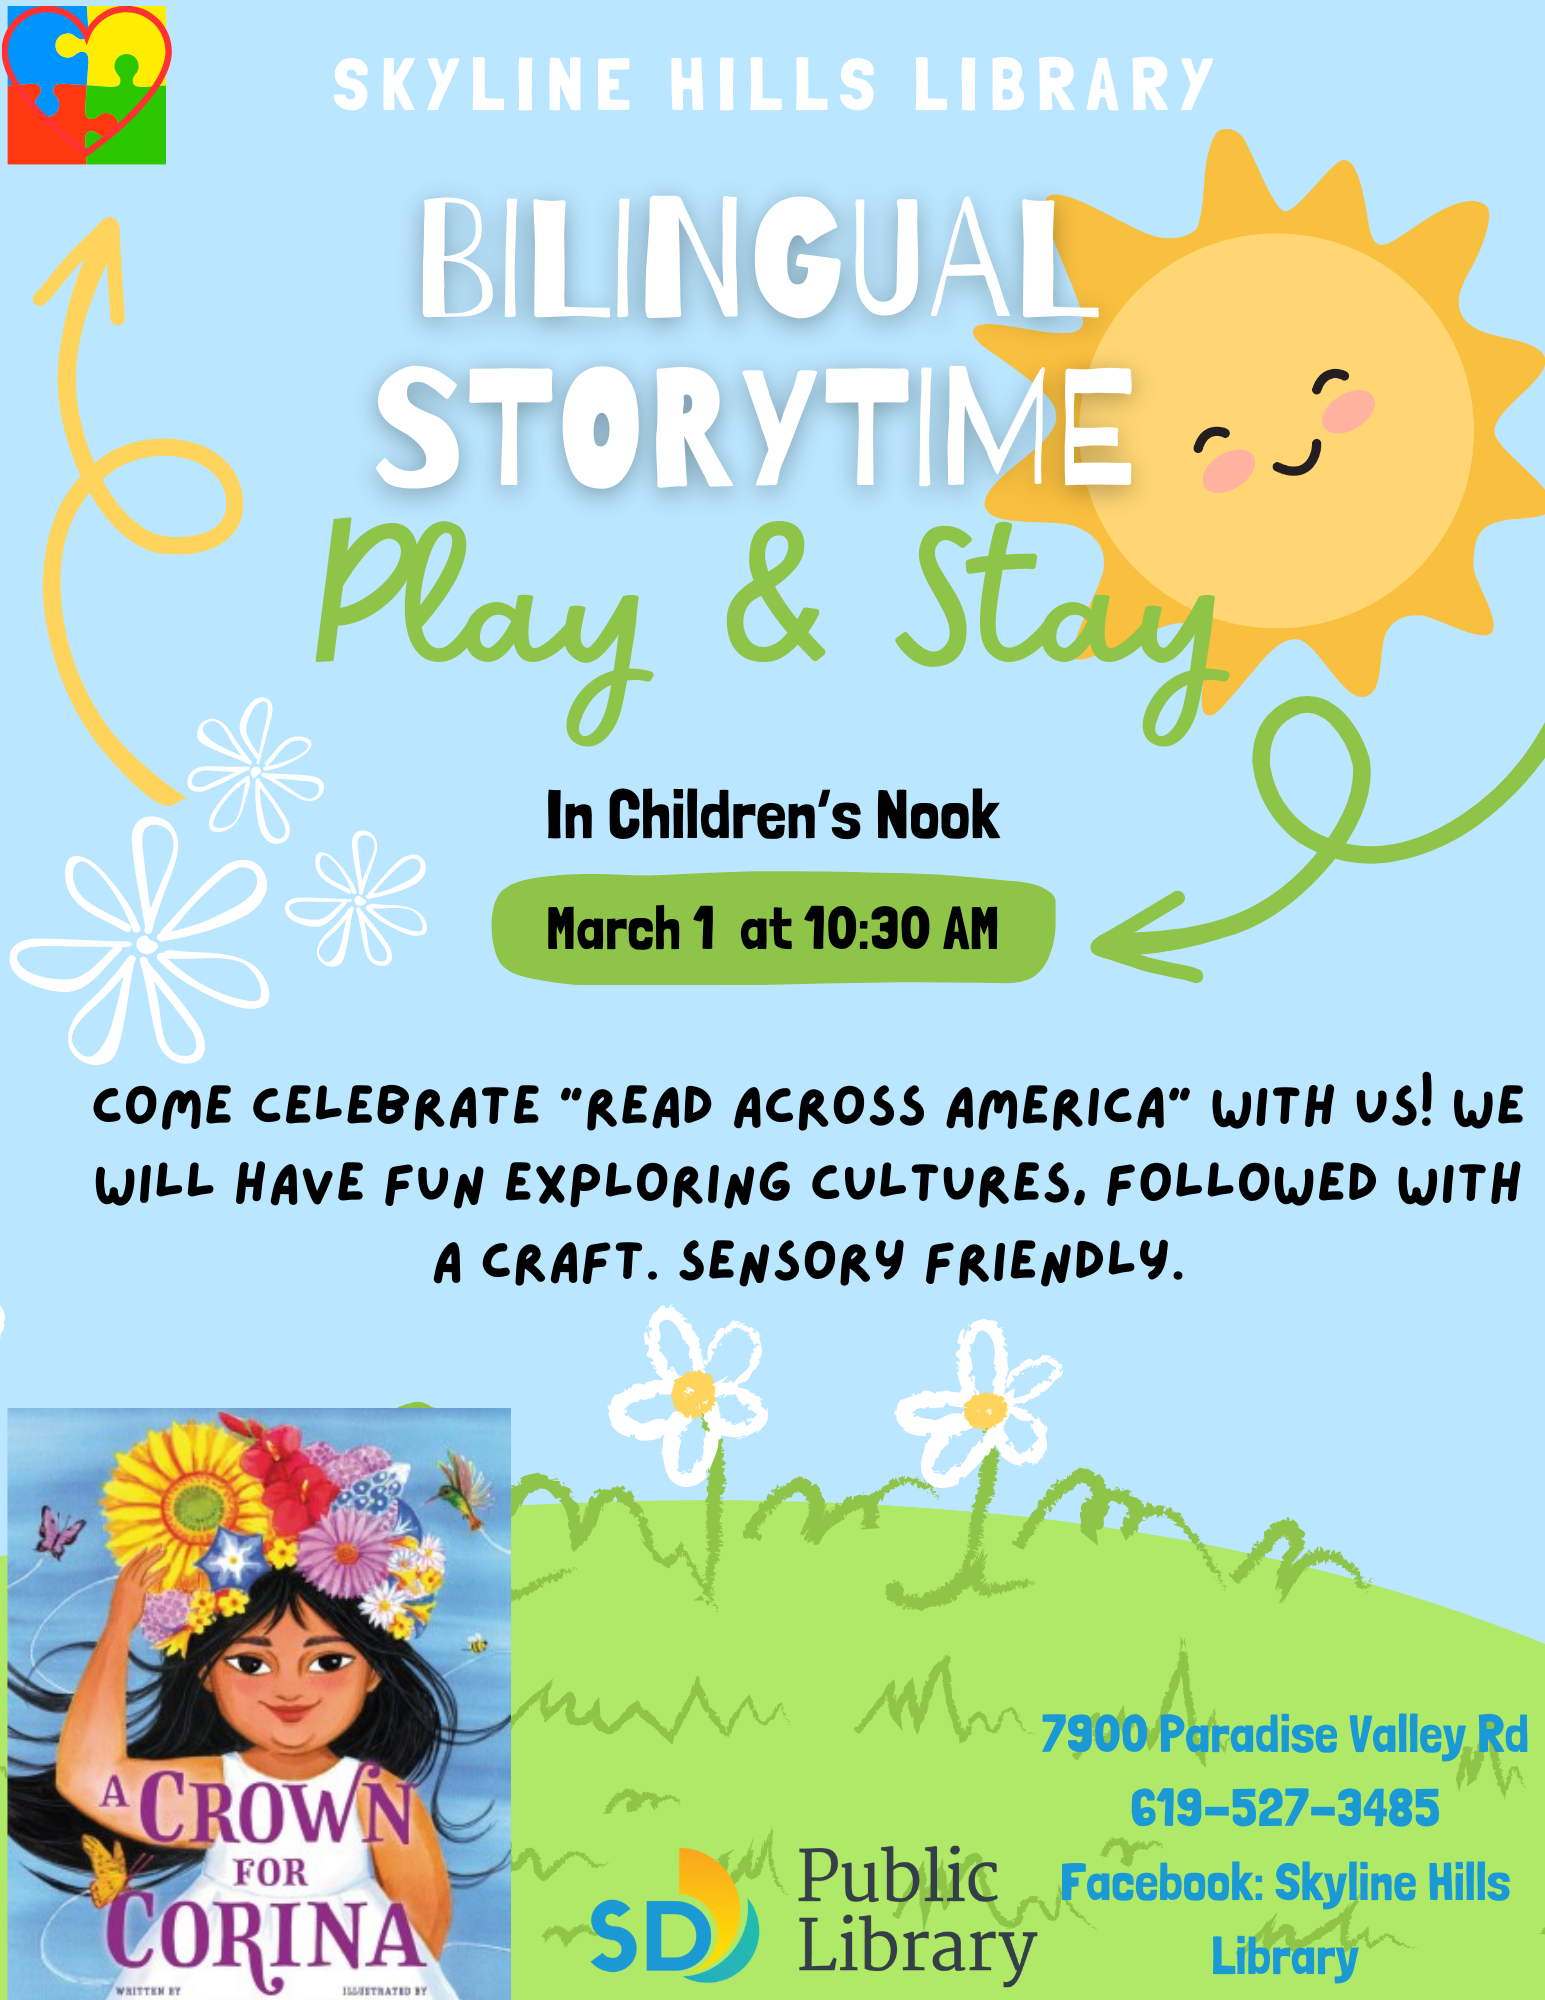 Bilingual Storytime Play & Stay Celebrating Read Across America!